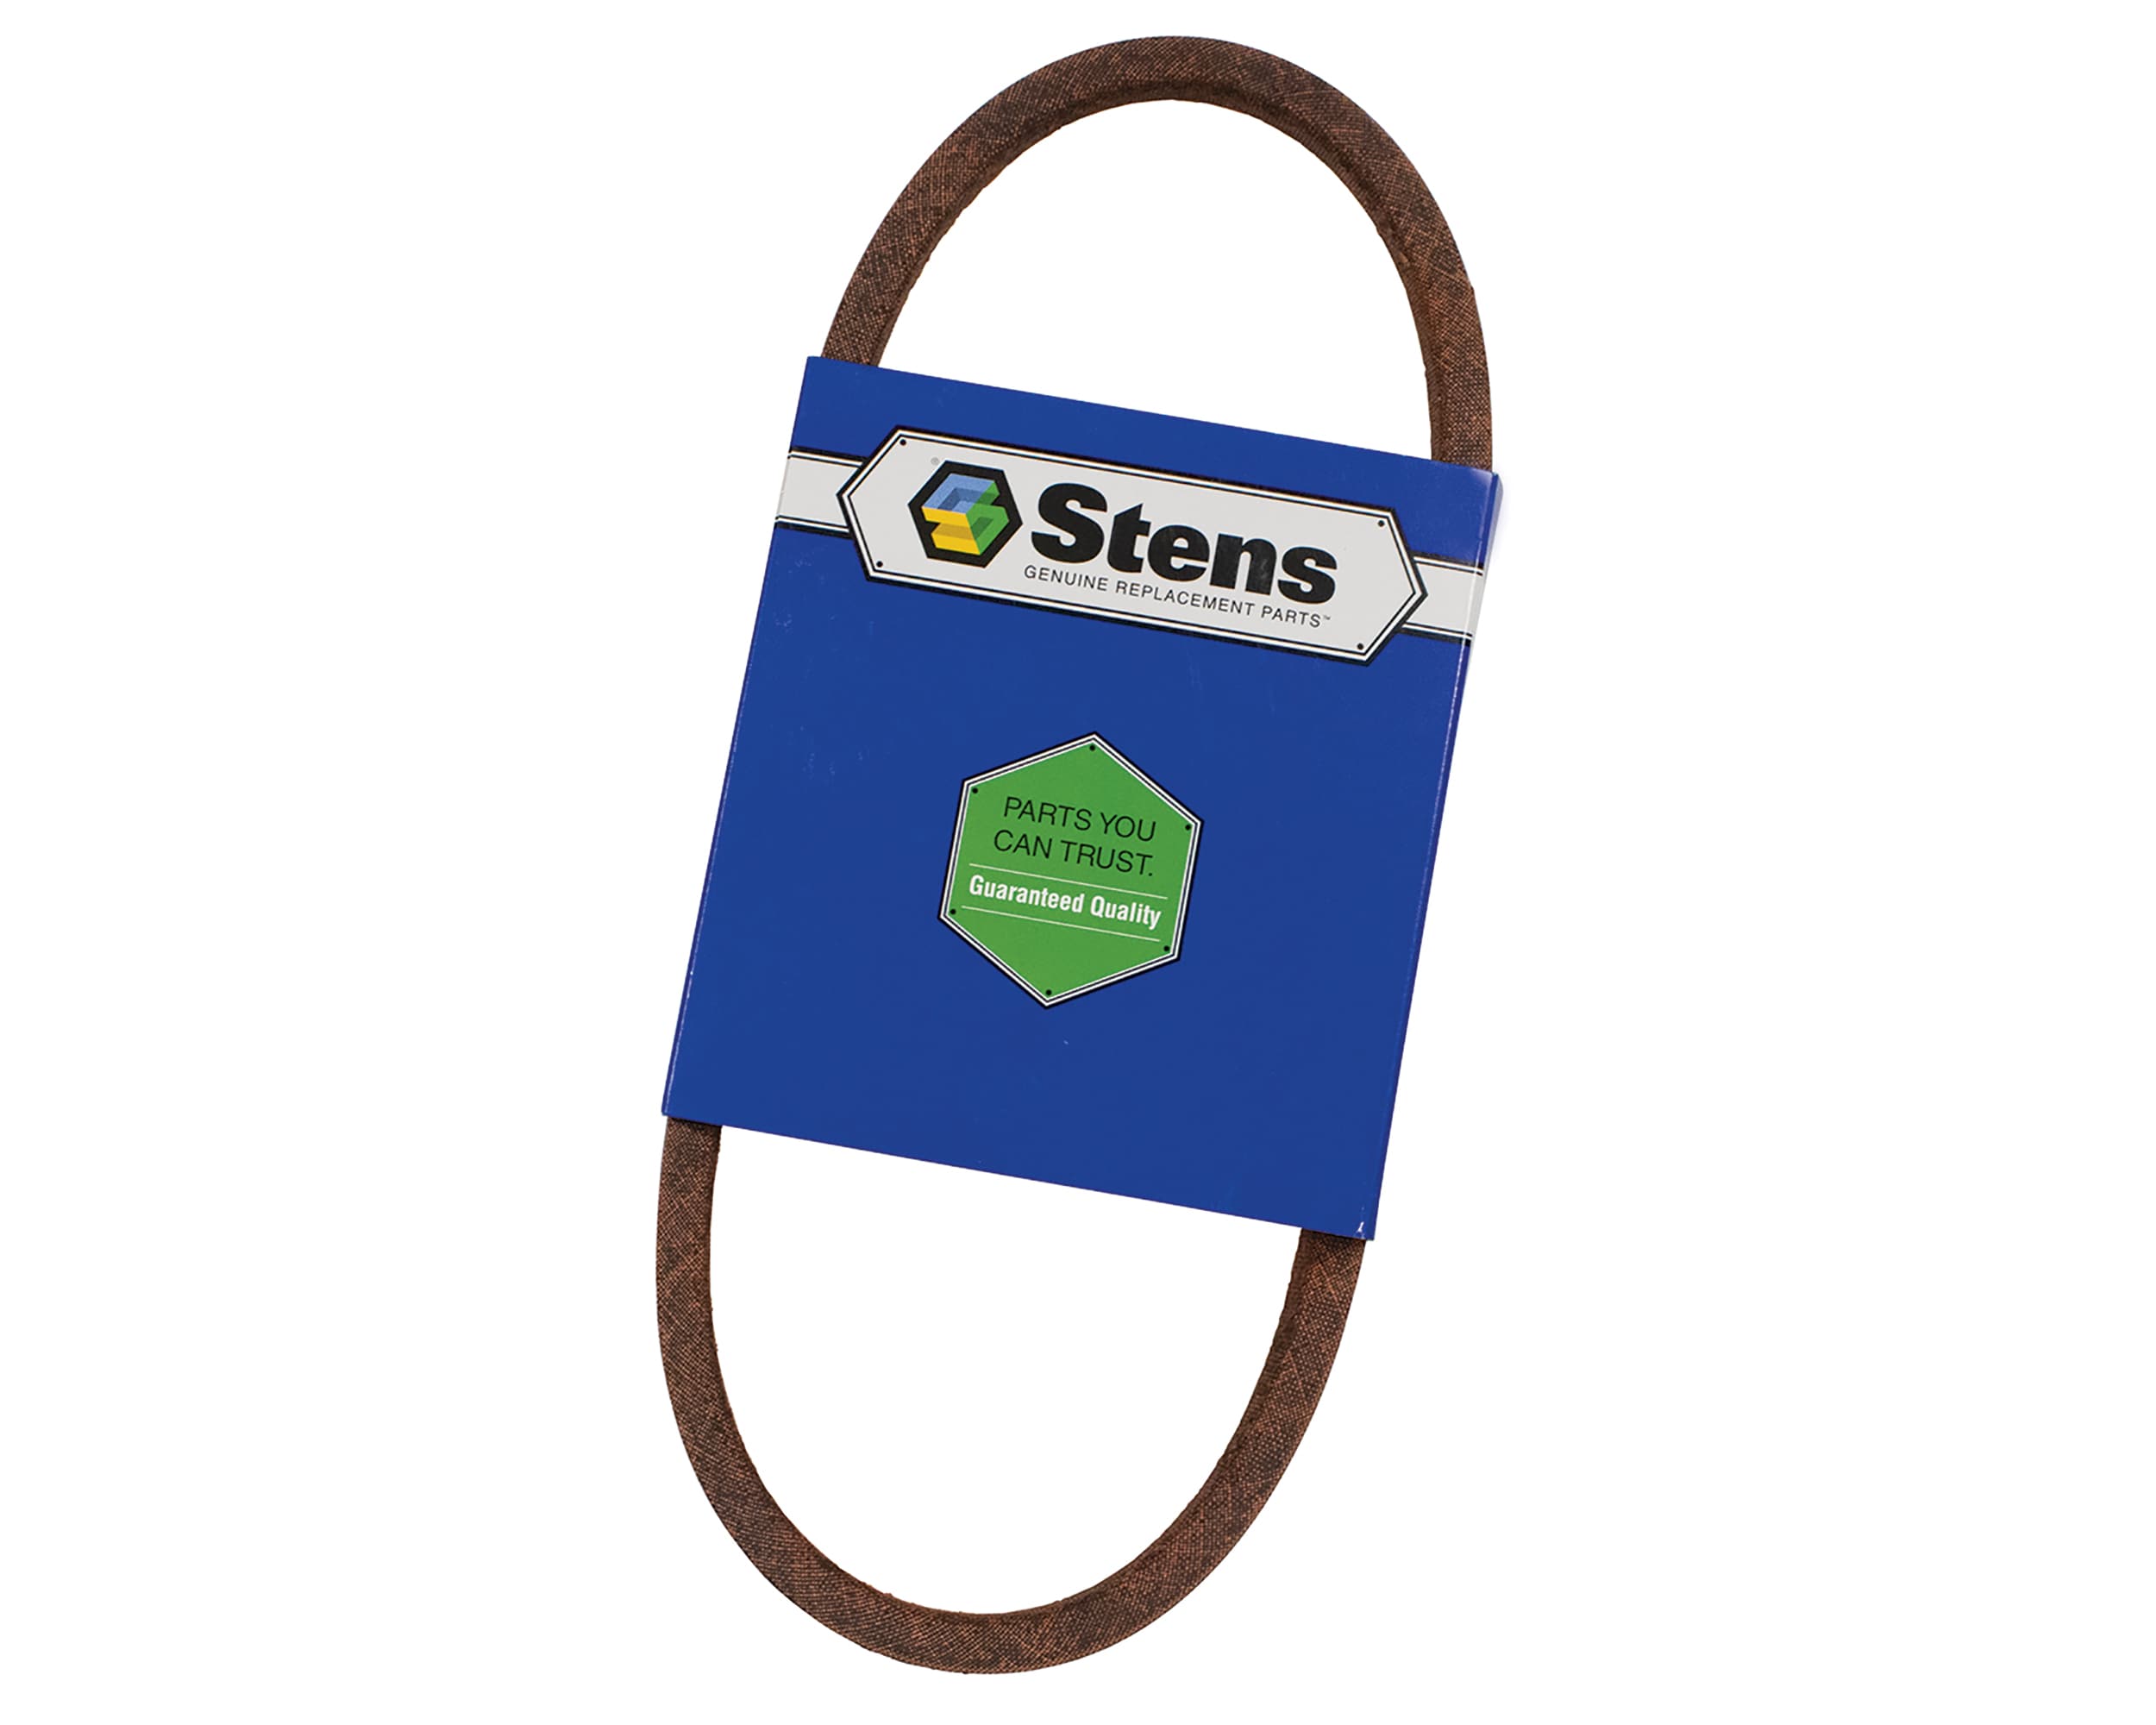 STENS OEM Replacement Belt for Cub Cadet LTX1040 Tractors, 2009 and Newer  754-04208, 954-04208, 954-04208A 265-621 - The Home Depot